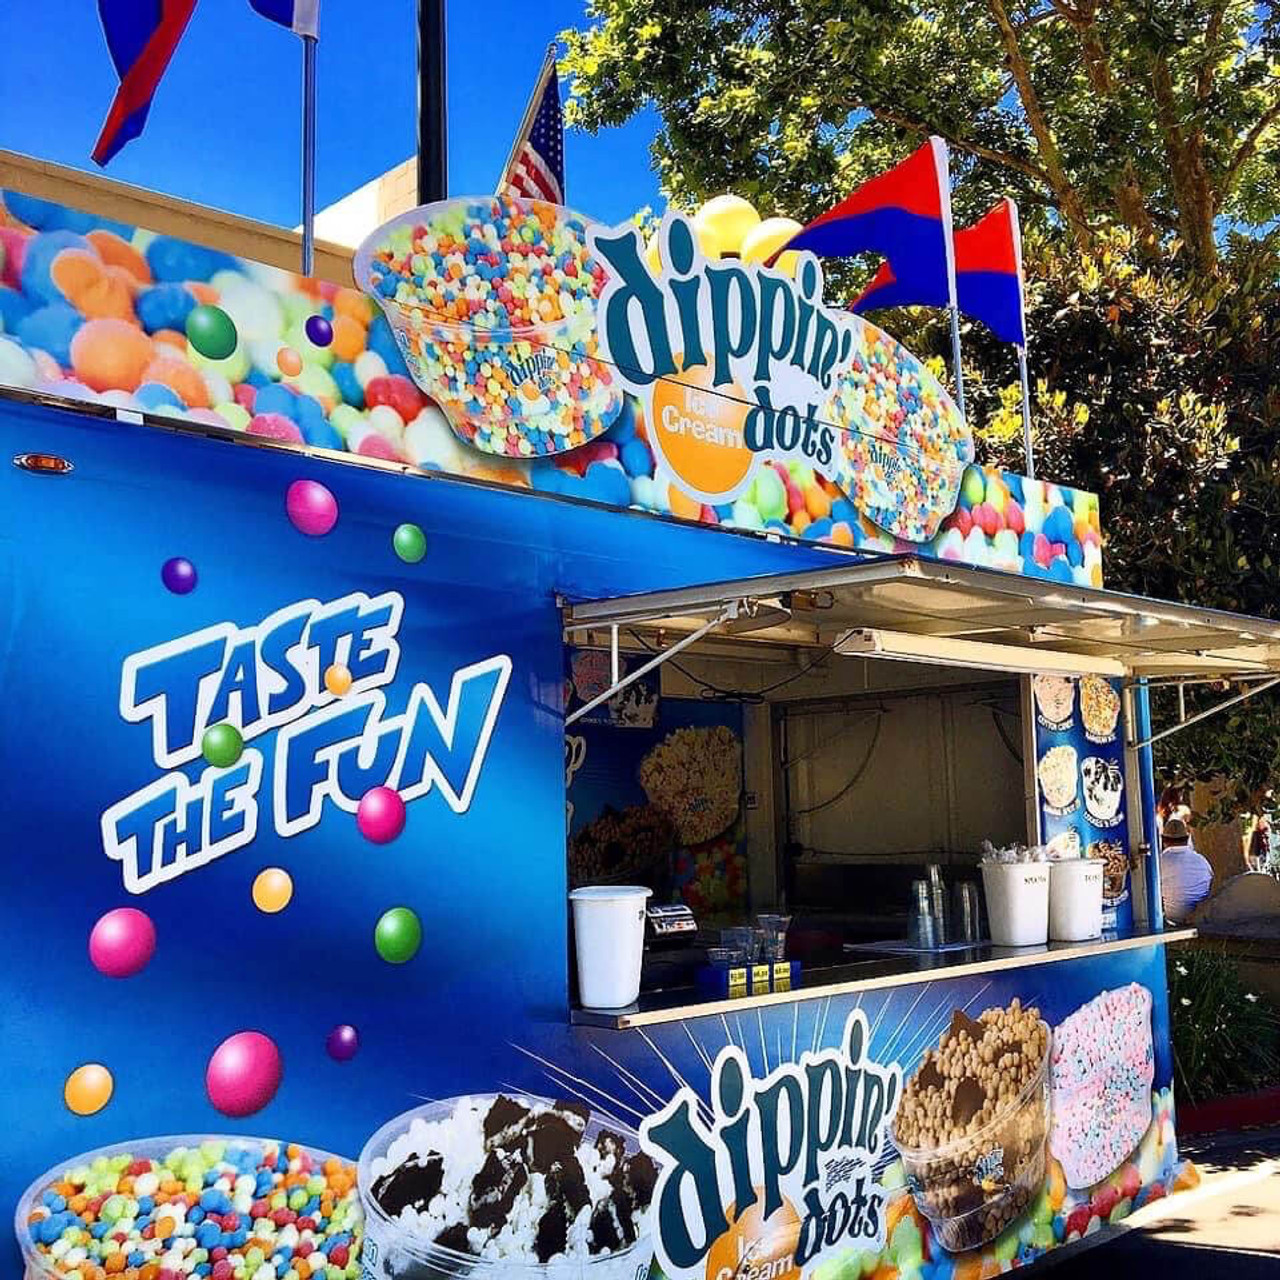 Empowering Dippin' Dots to Sell Frozen Goods Online